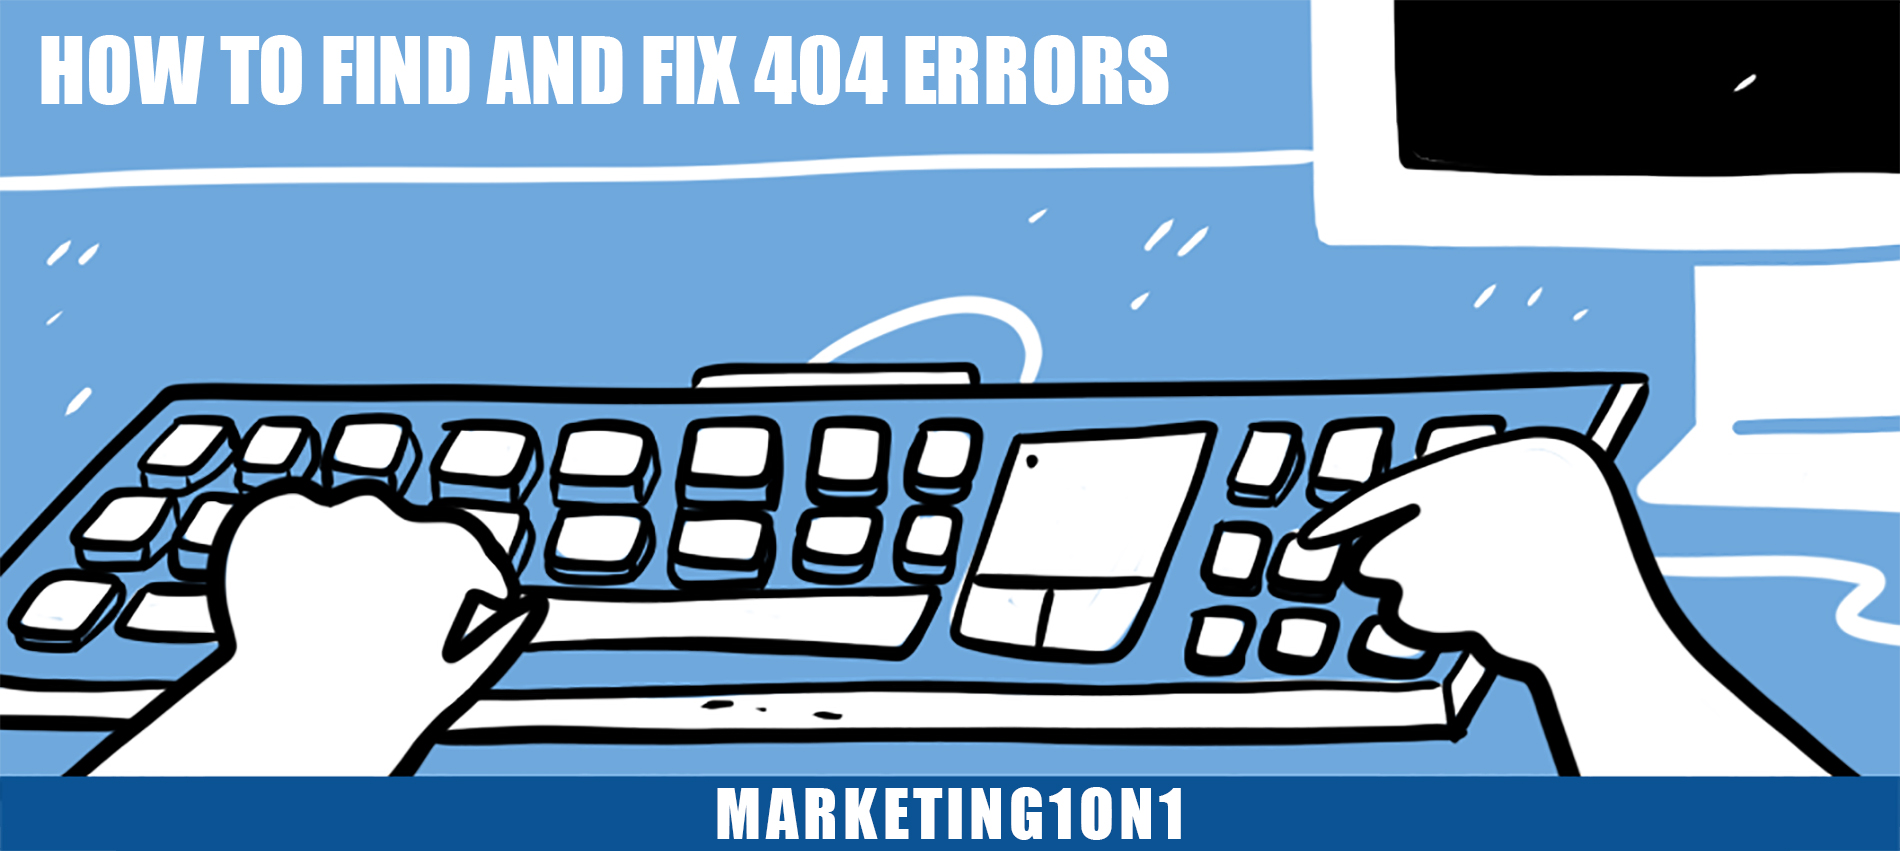 How to find and fix 404 errors